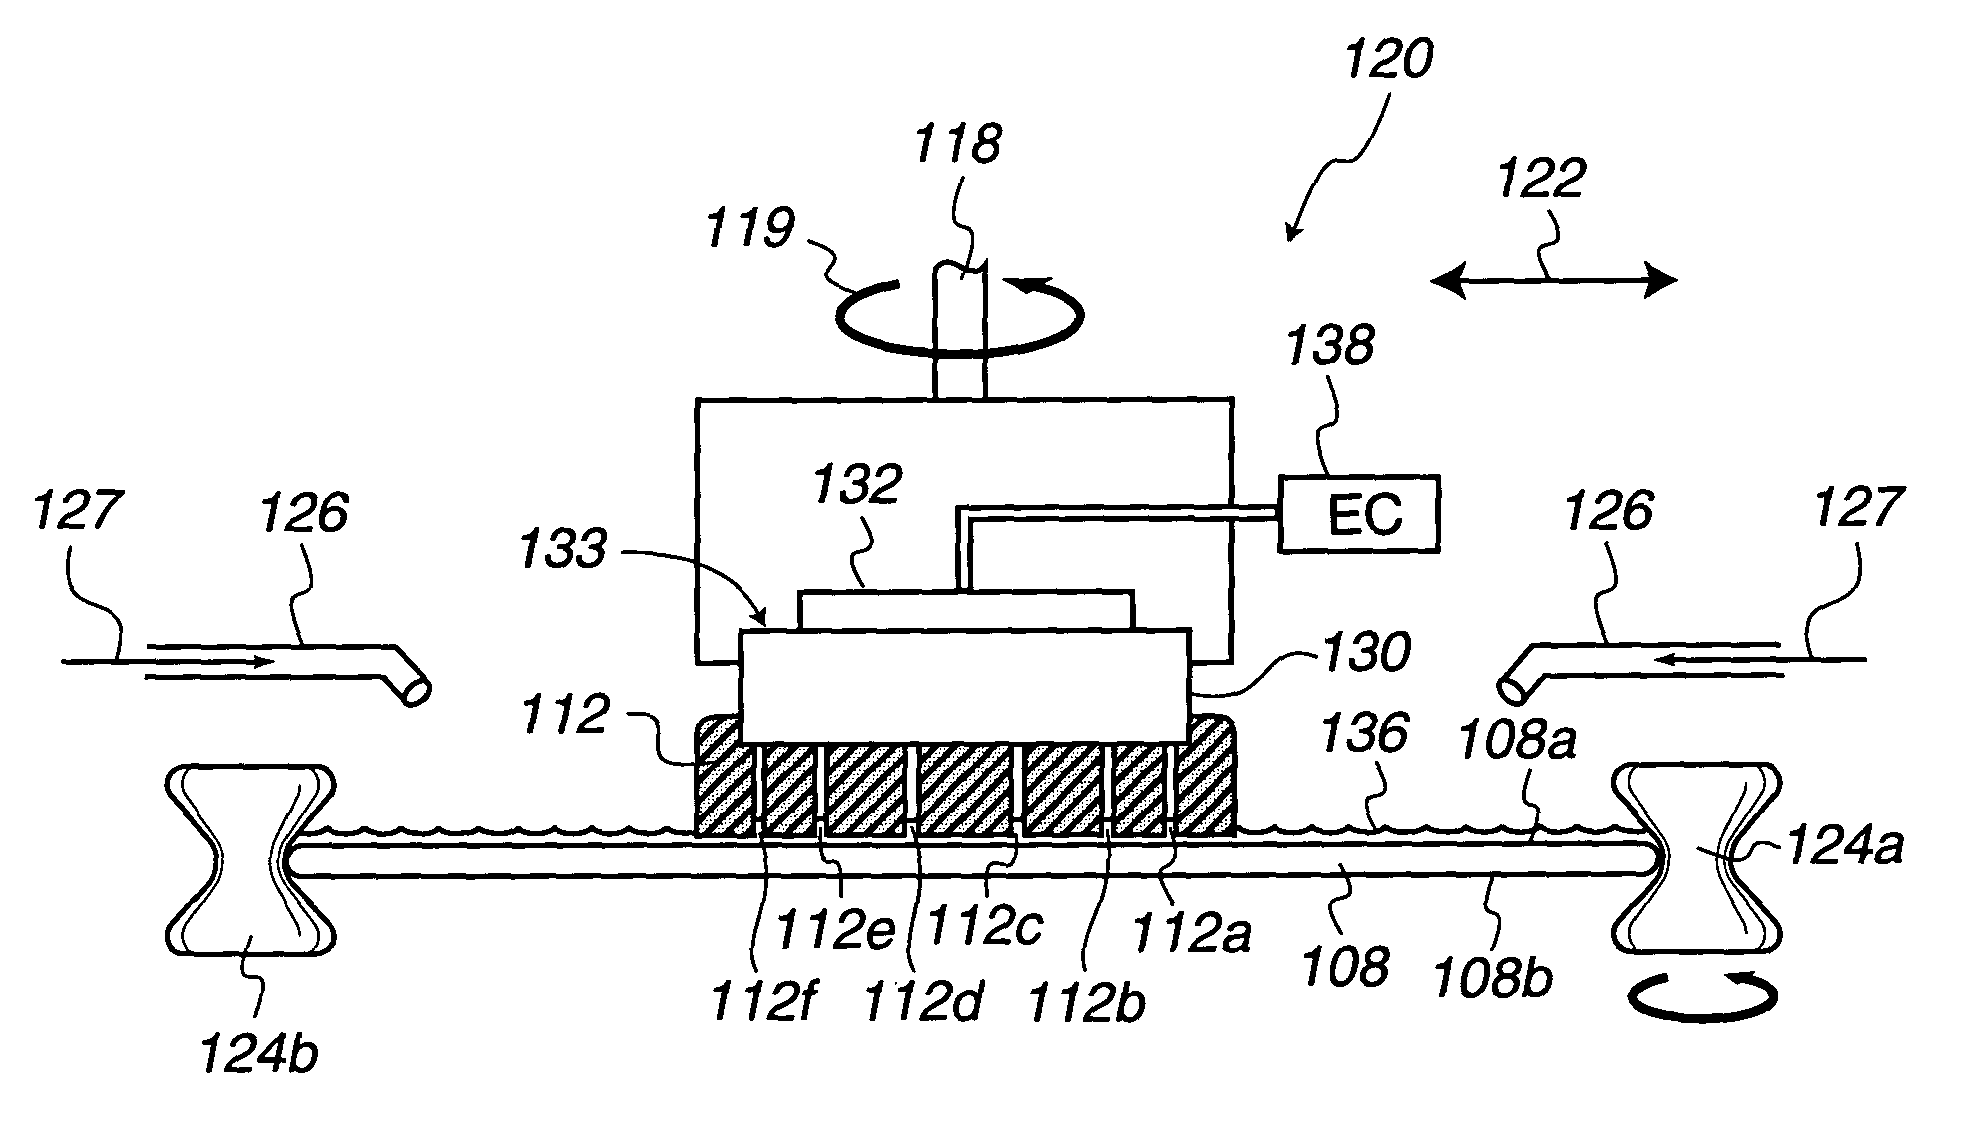 Brush scrubbing-high frequency resonating wafer processing system and methods for making and implementing the same